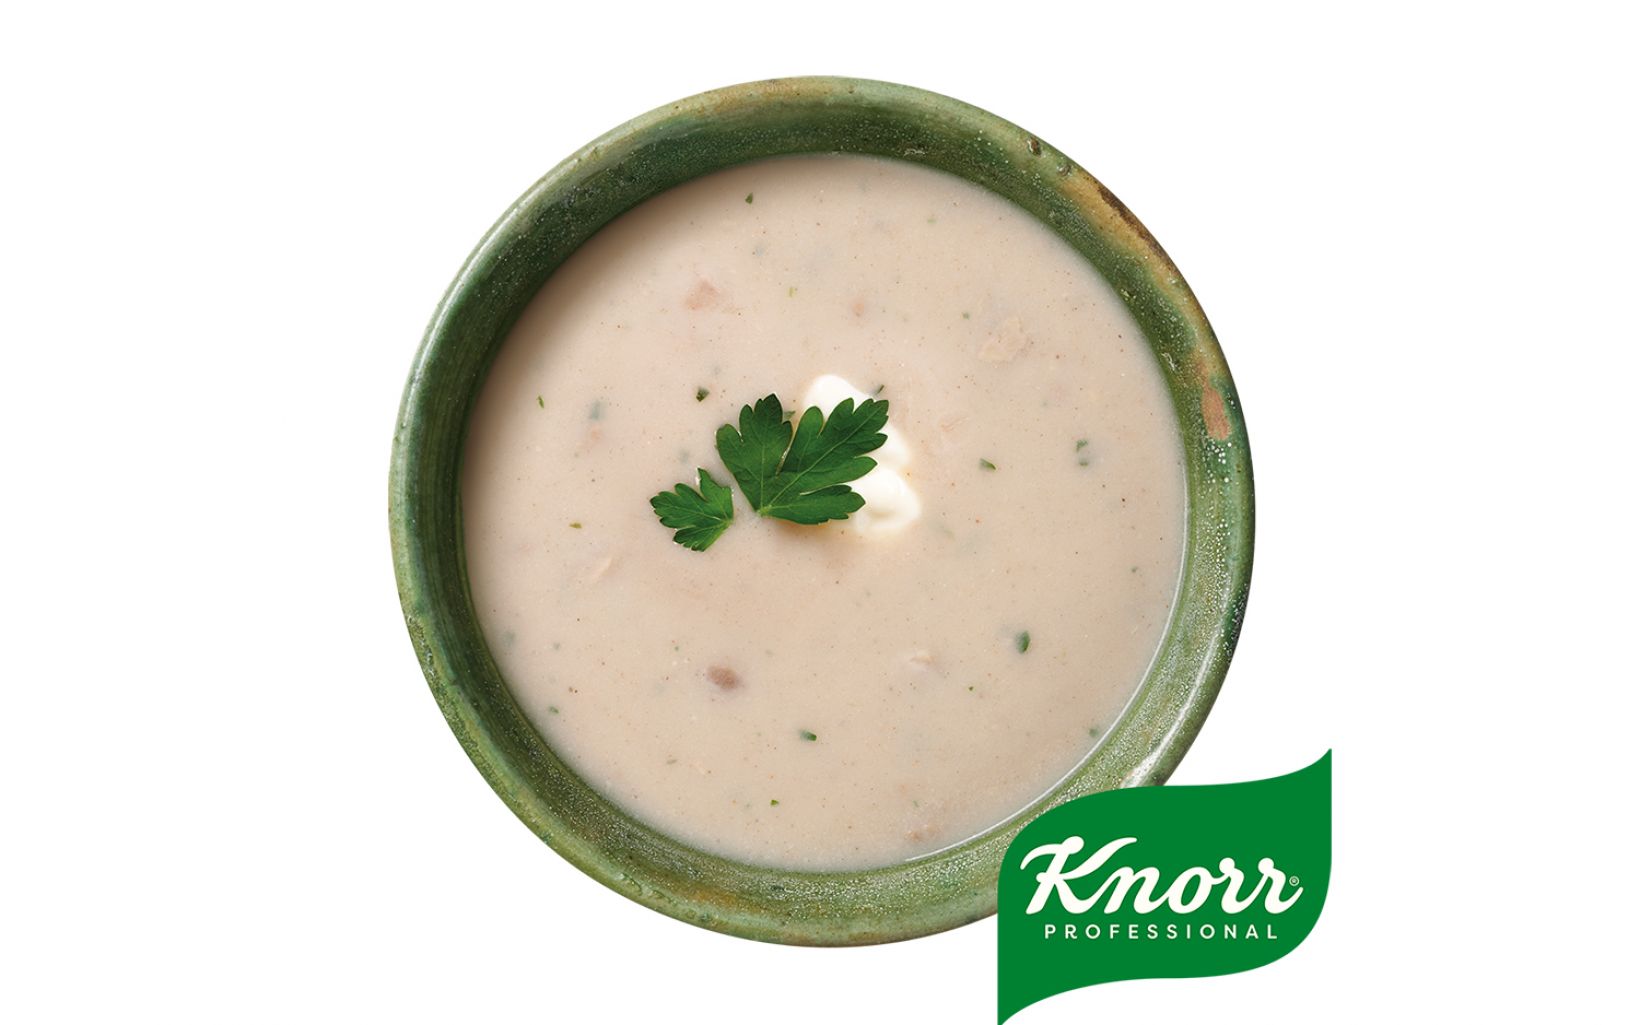 49326 2365uk Knorr Classic Cream Of Mushroom Soup With Logo Supp Image 1200x1200px 20203pm Edit